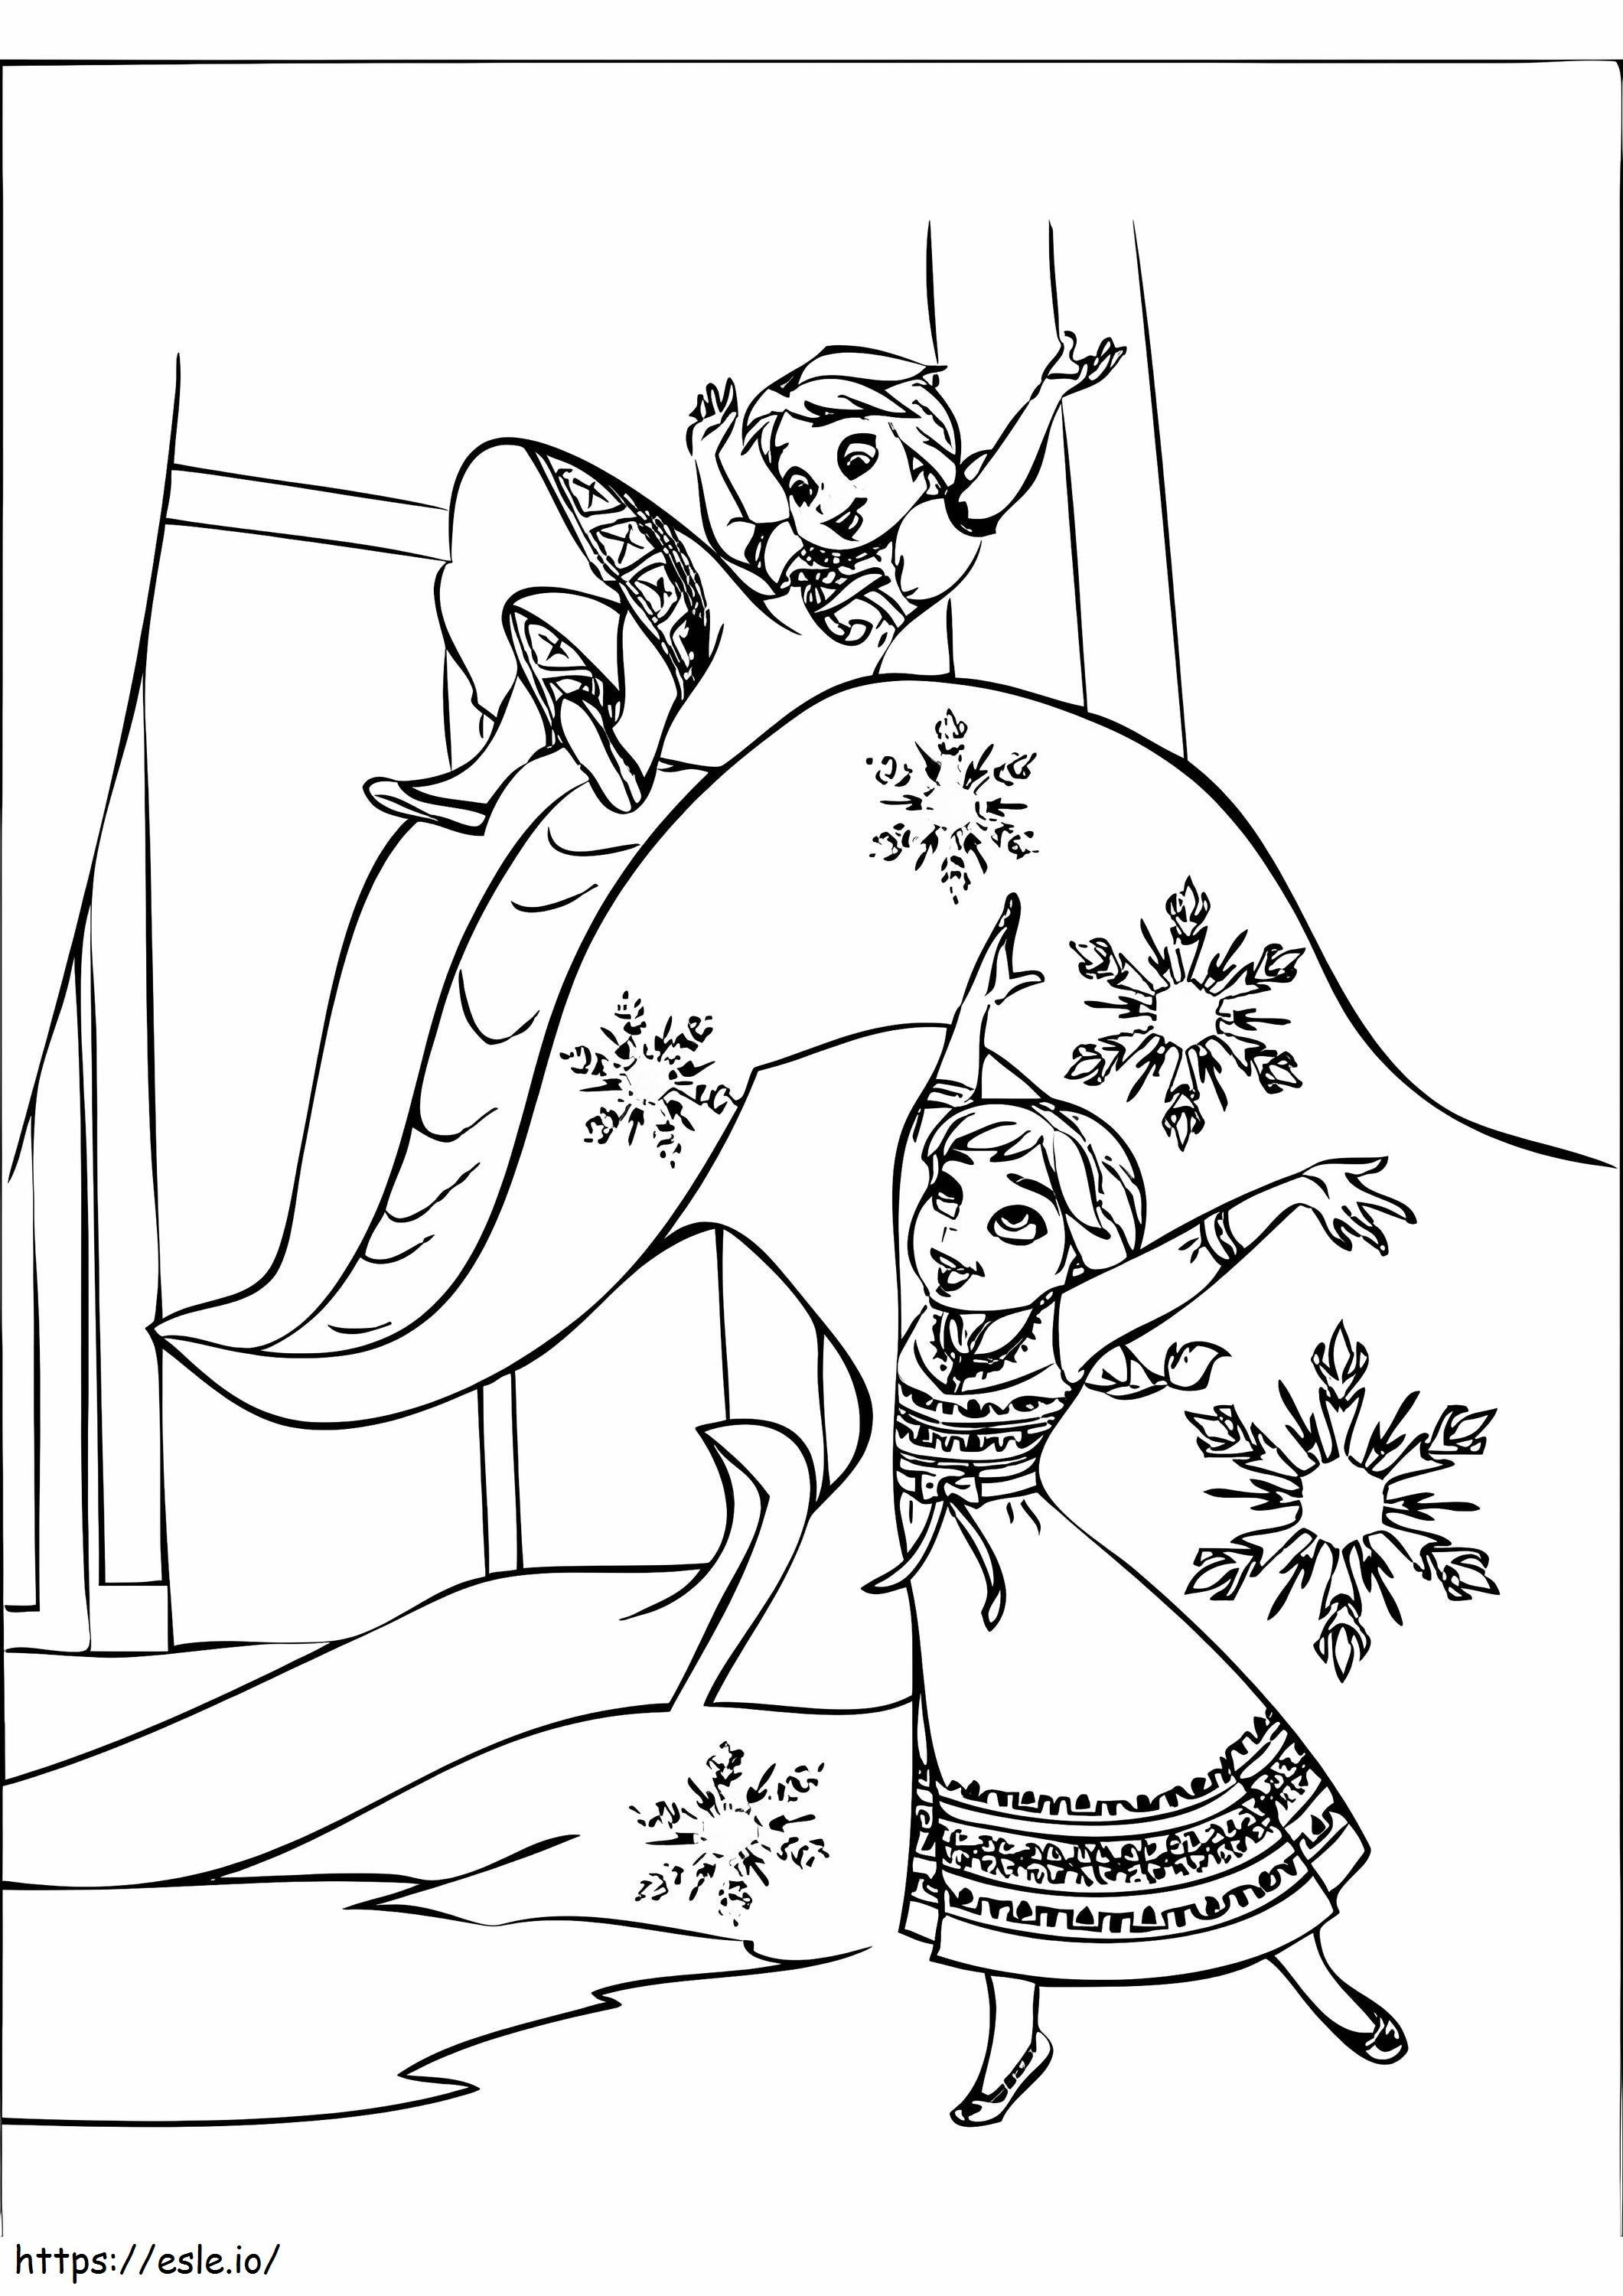 Child Elsa And Anna Funny coloring page